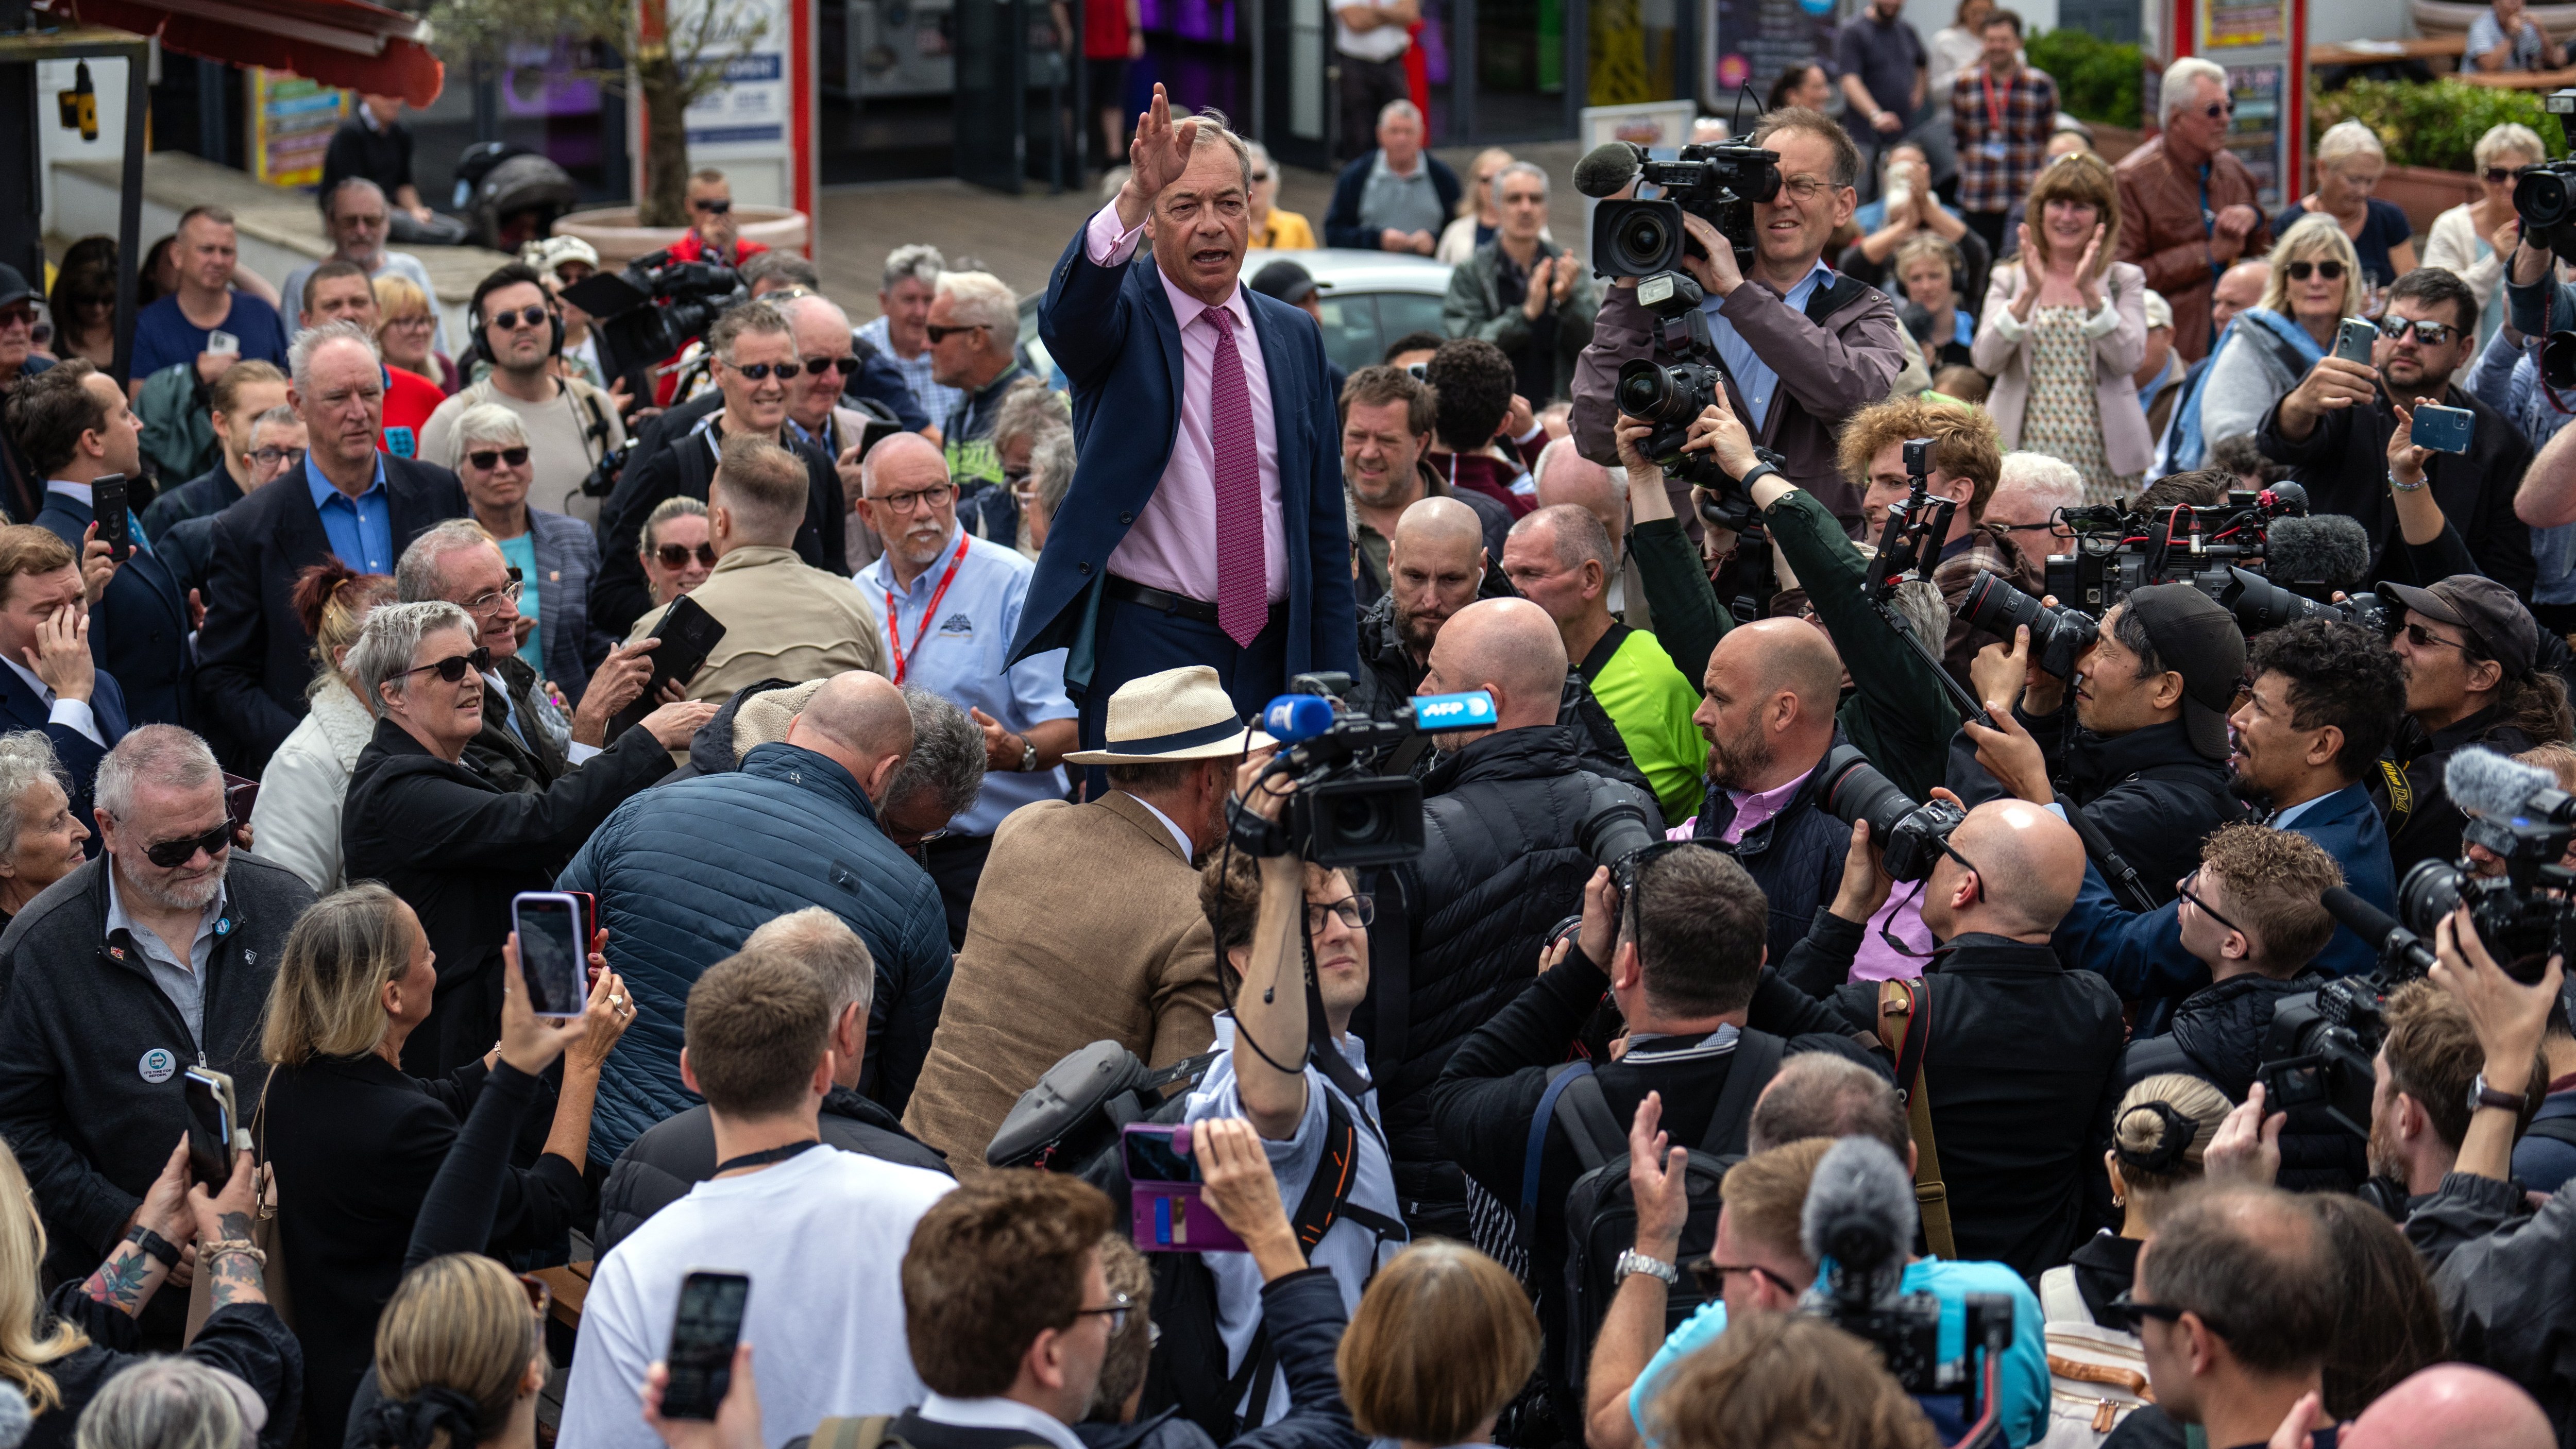 Reform UK said Nigel Farage was greeted “like a footballer” in Clacton when he announced his candidacy